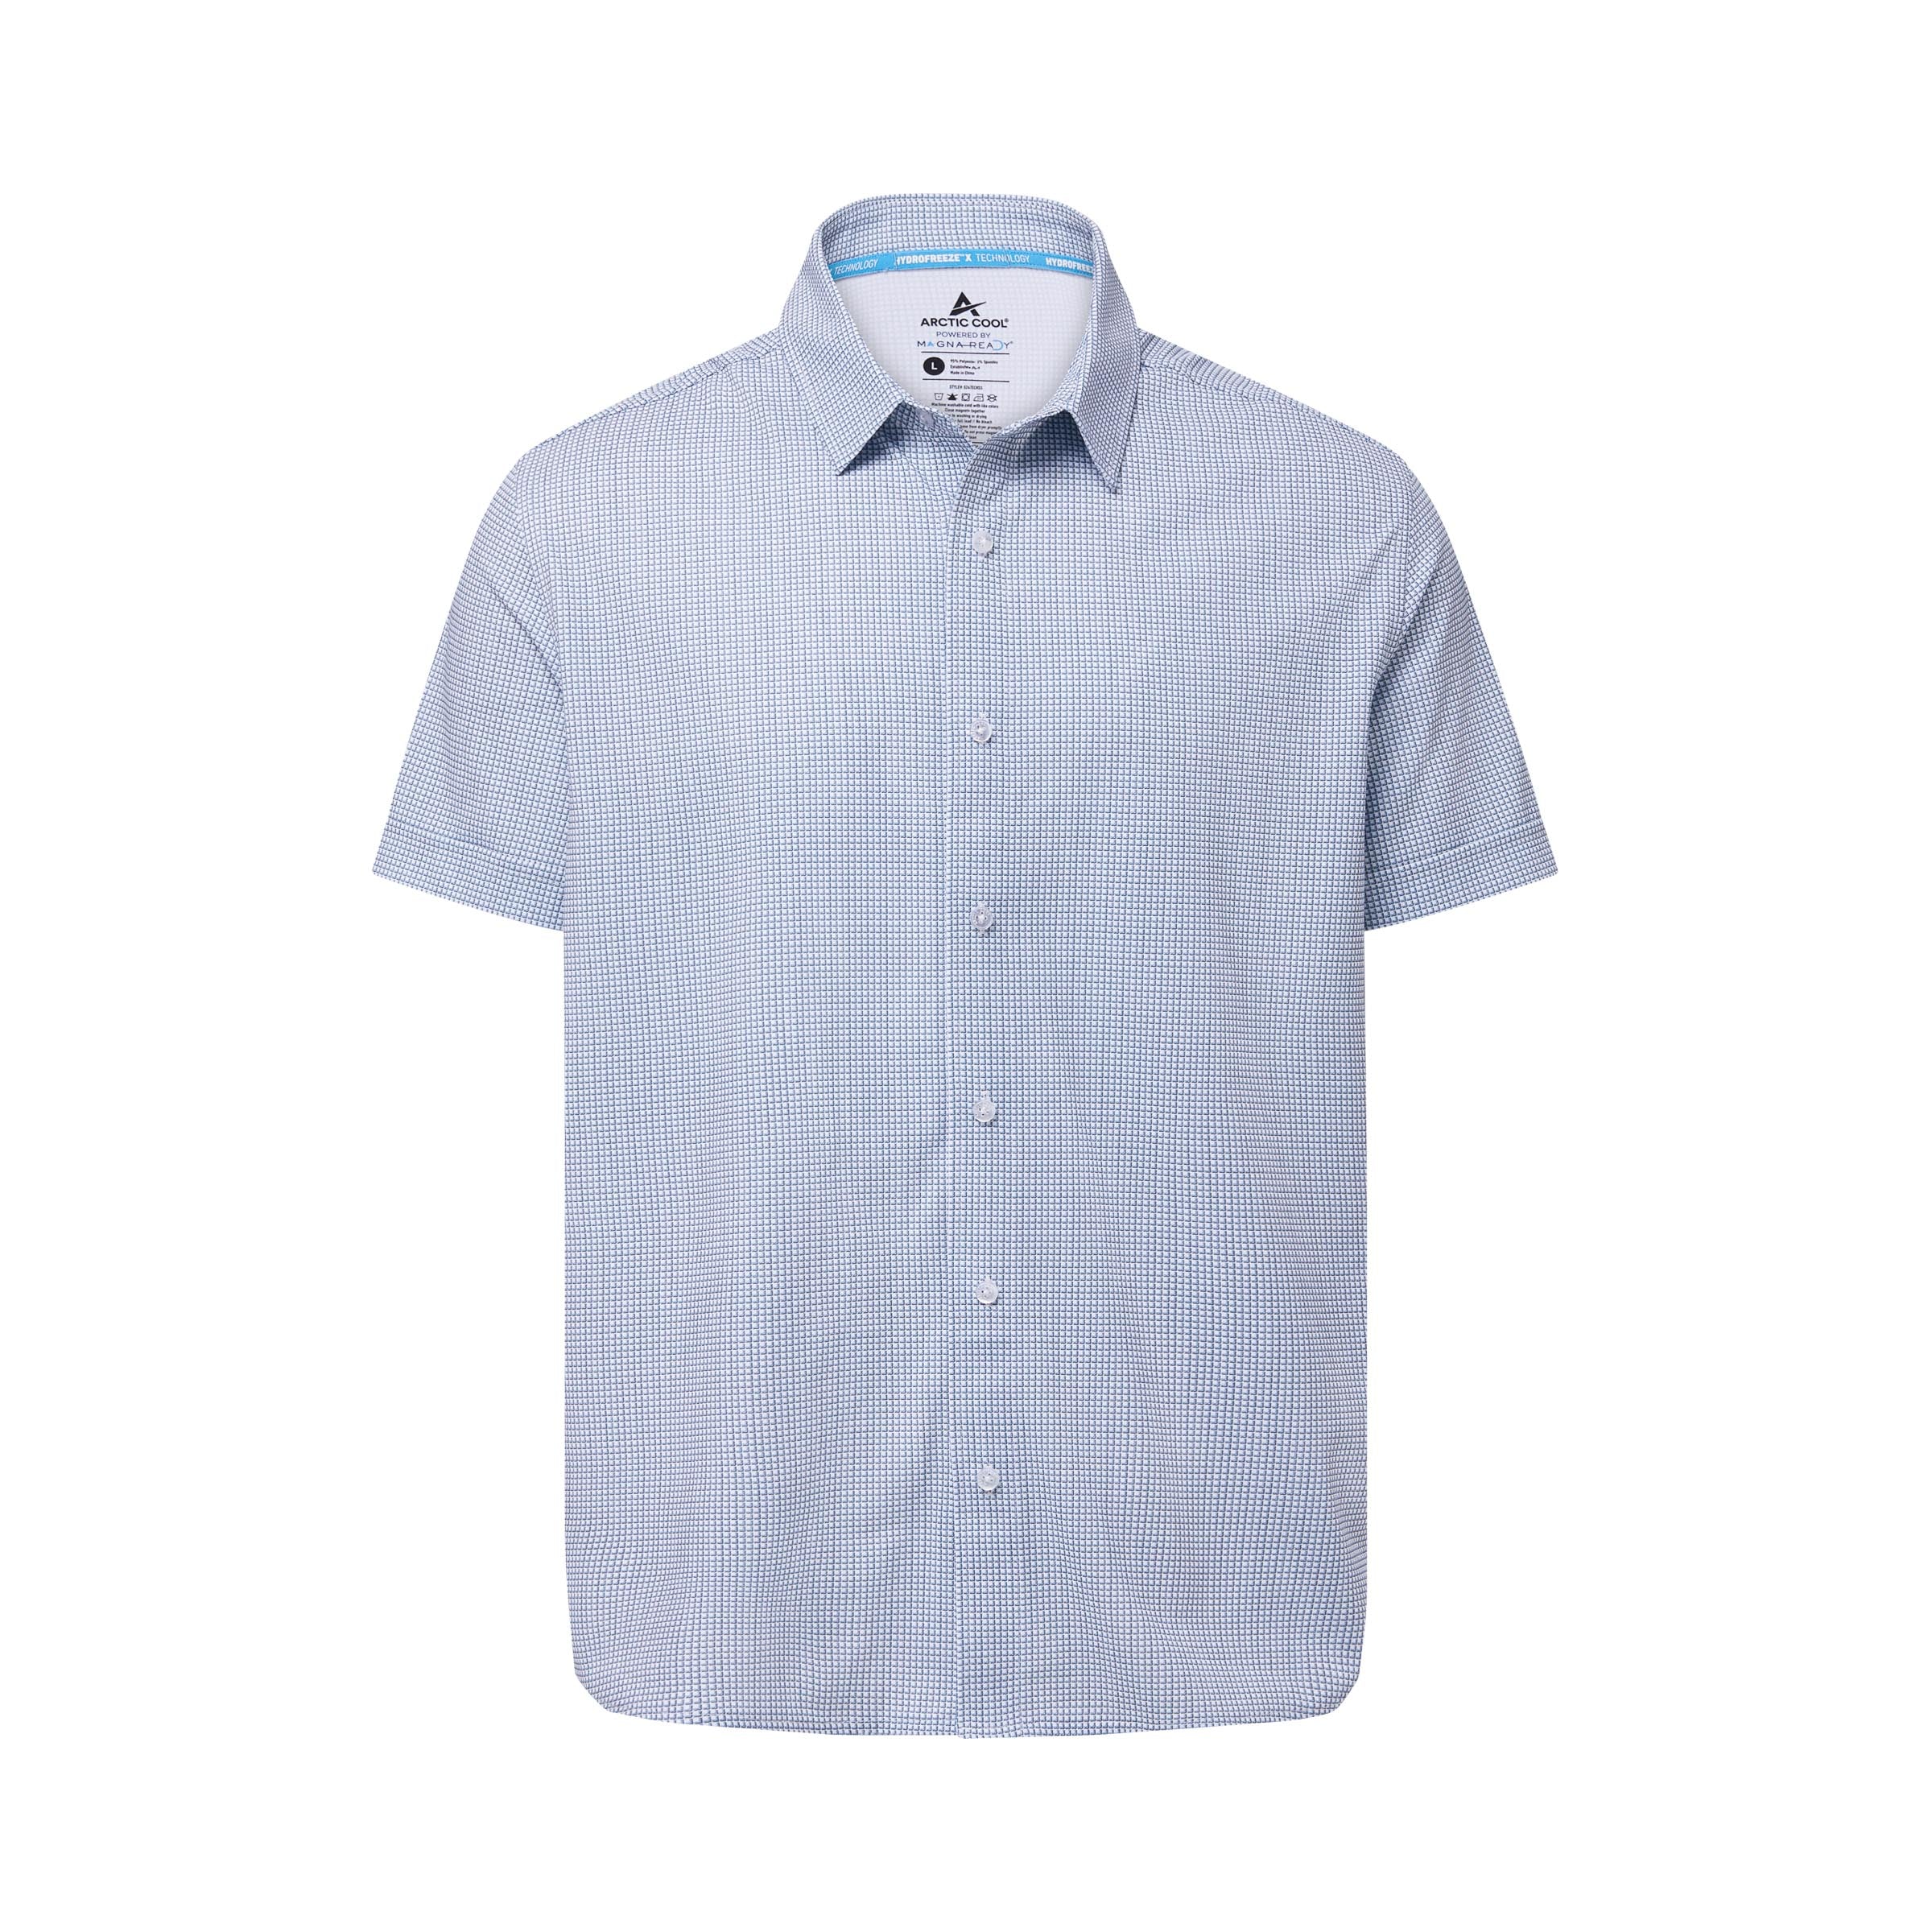 MagnaReady x Arctic Cooling Pique Polo Short Sleeves in Blue Shadow